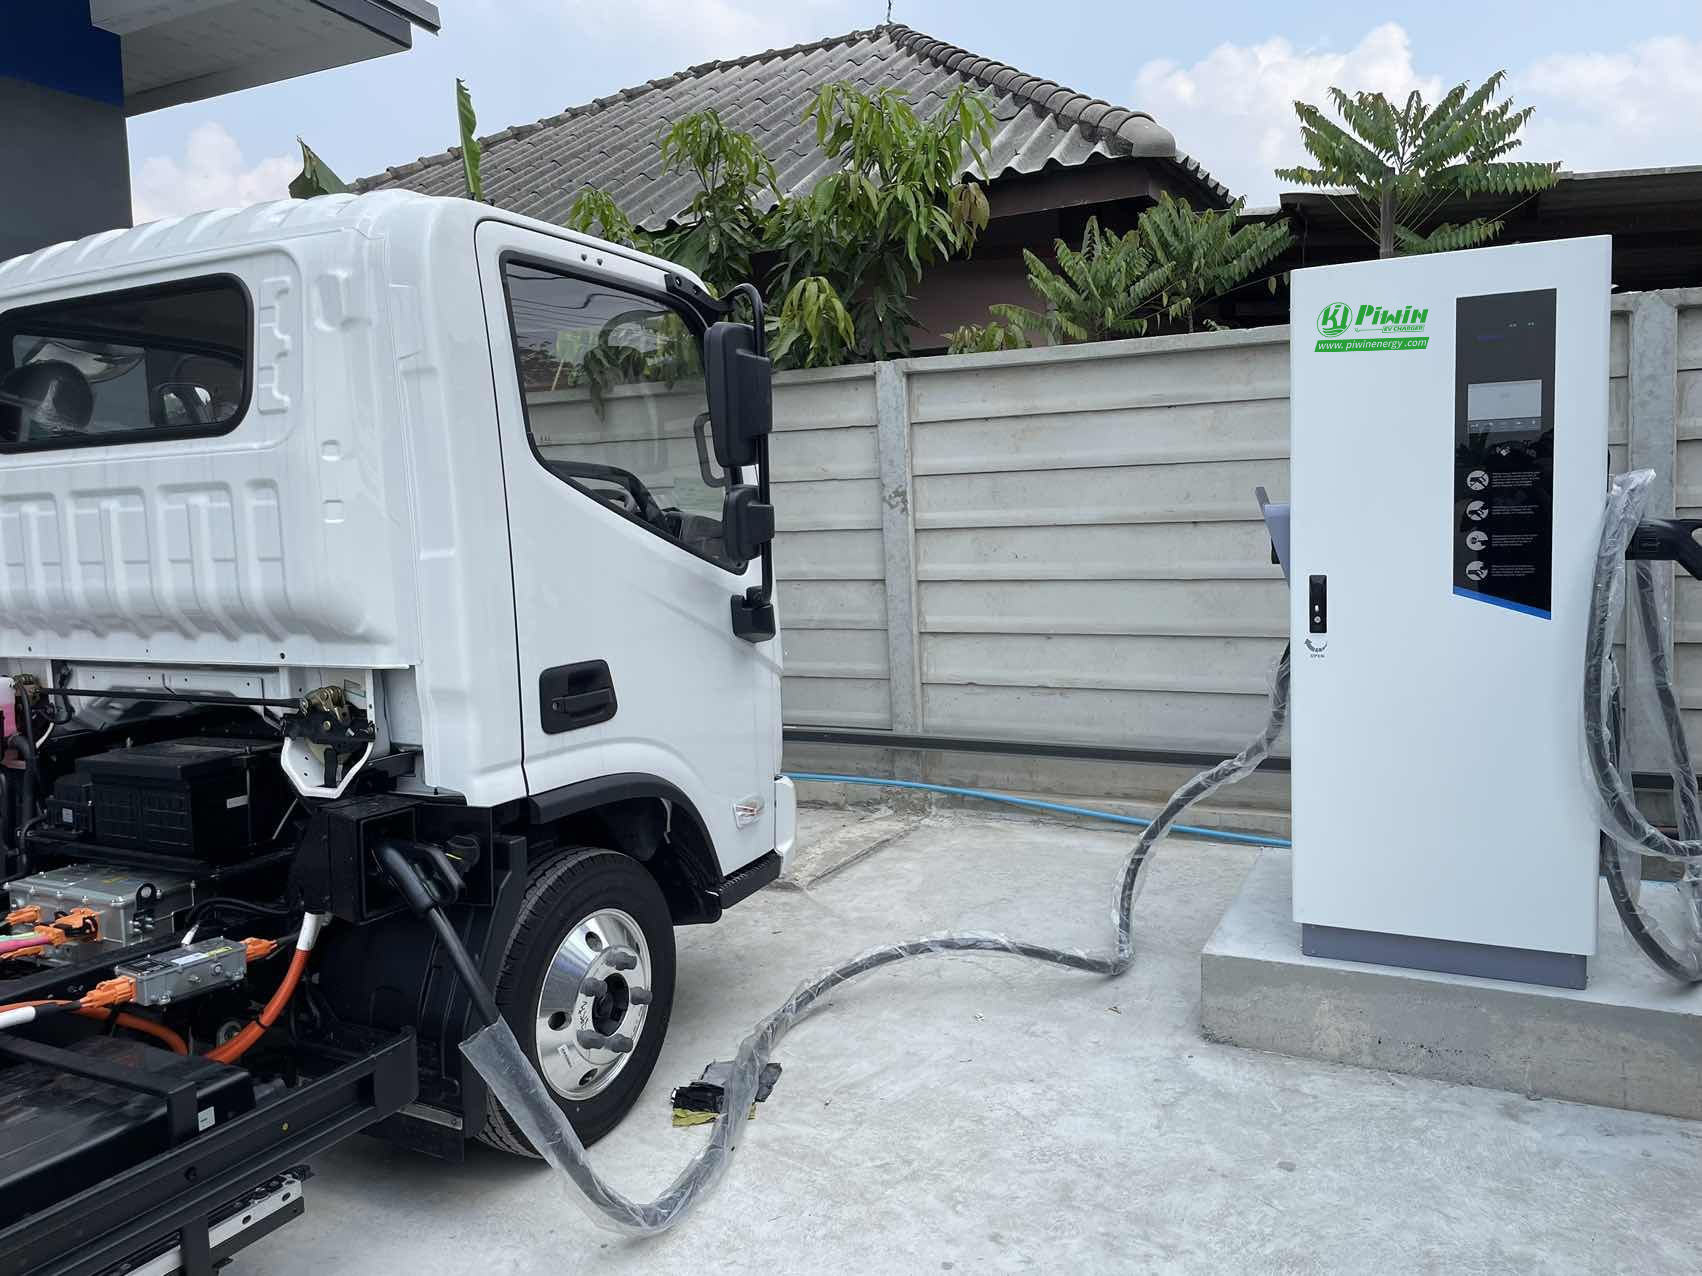 Commercial electric truck charging at Pilot x Piwin DC EV Charging Station in Japan.